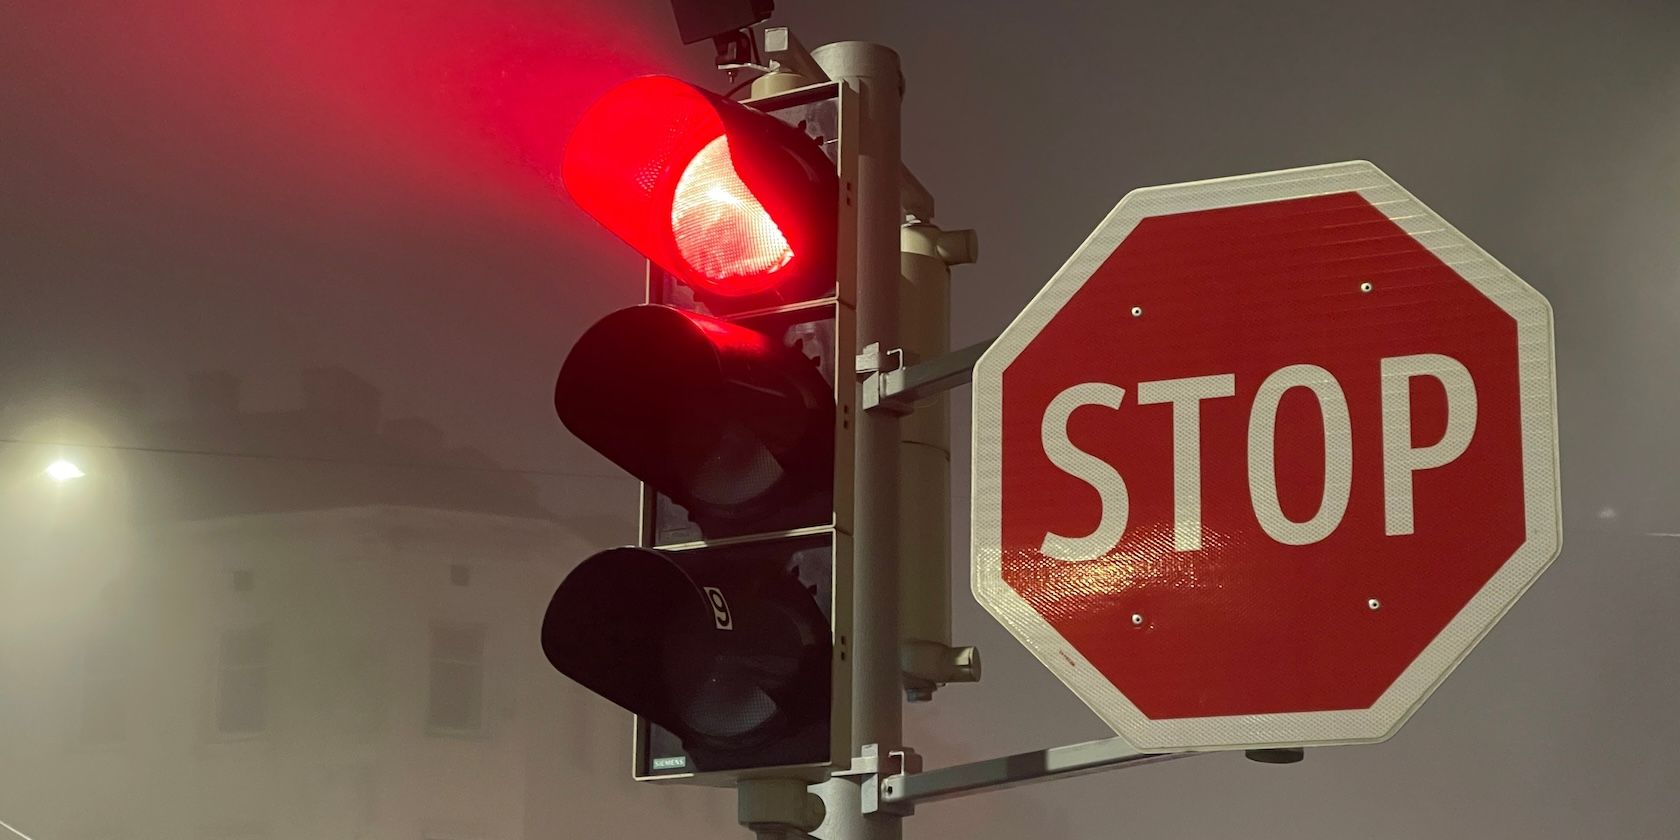 A set of traffic lights showing a red light next to a “STOP” sign